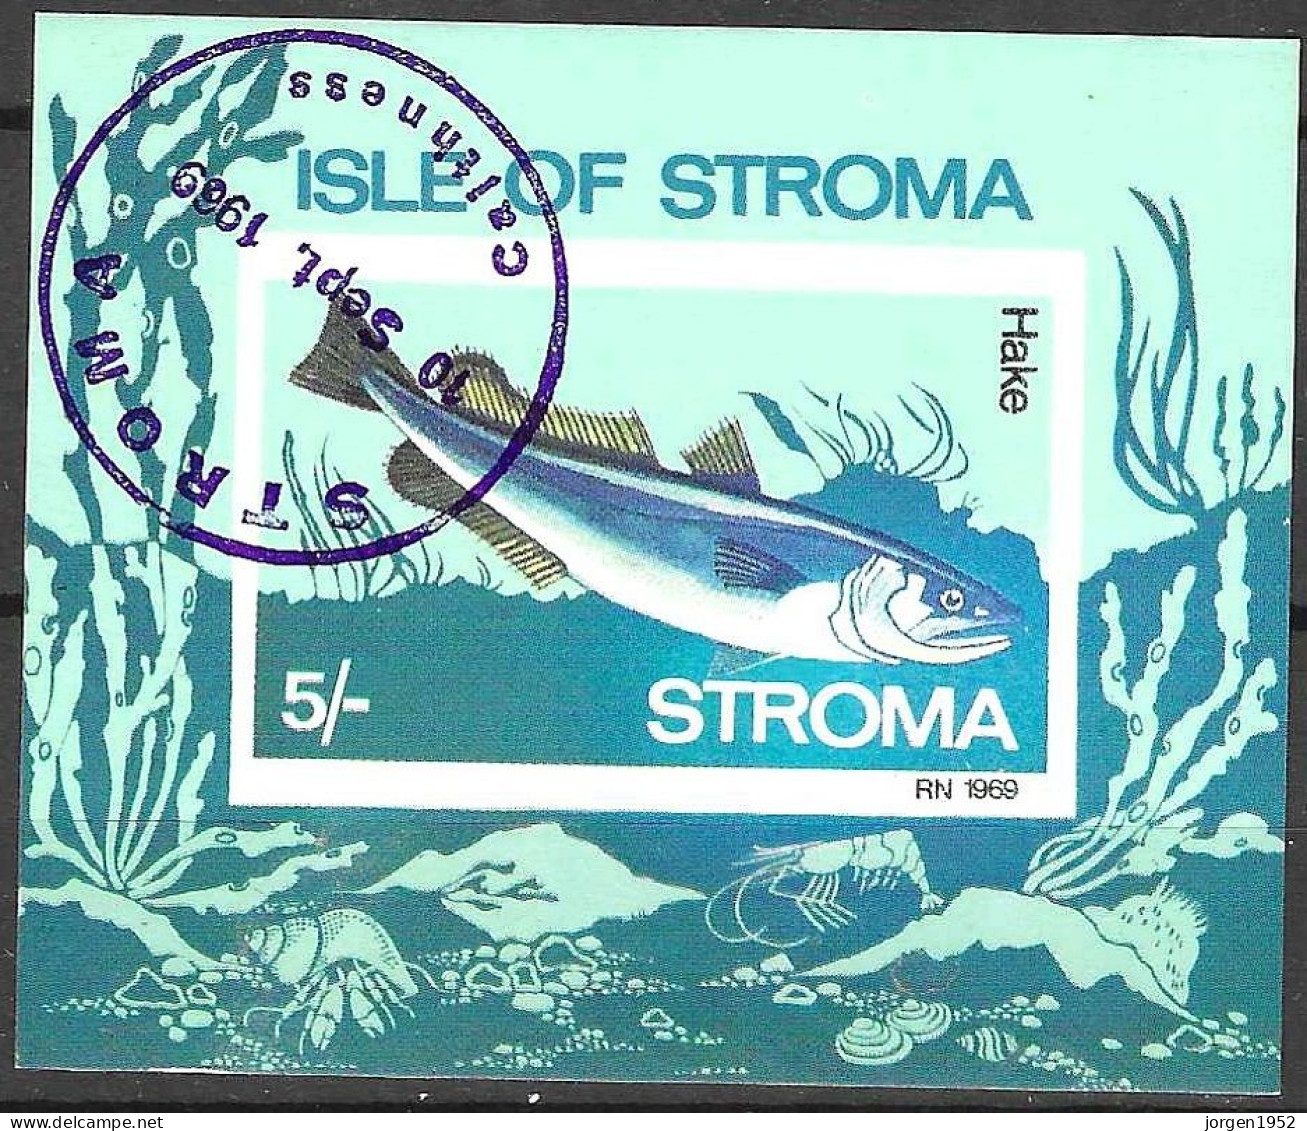 GREAT BRITAIN # SCOTLAND STROMA FROM 1969 STANLEY GIBBONS 04/07 - Cinderella